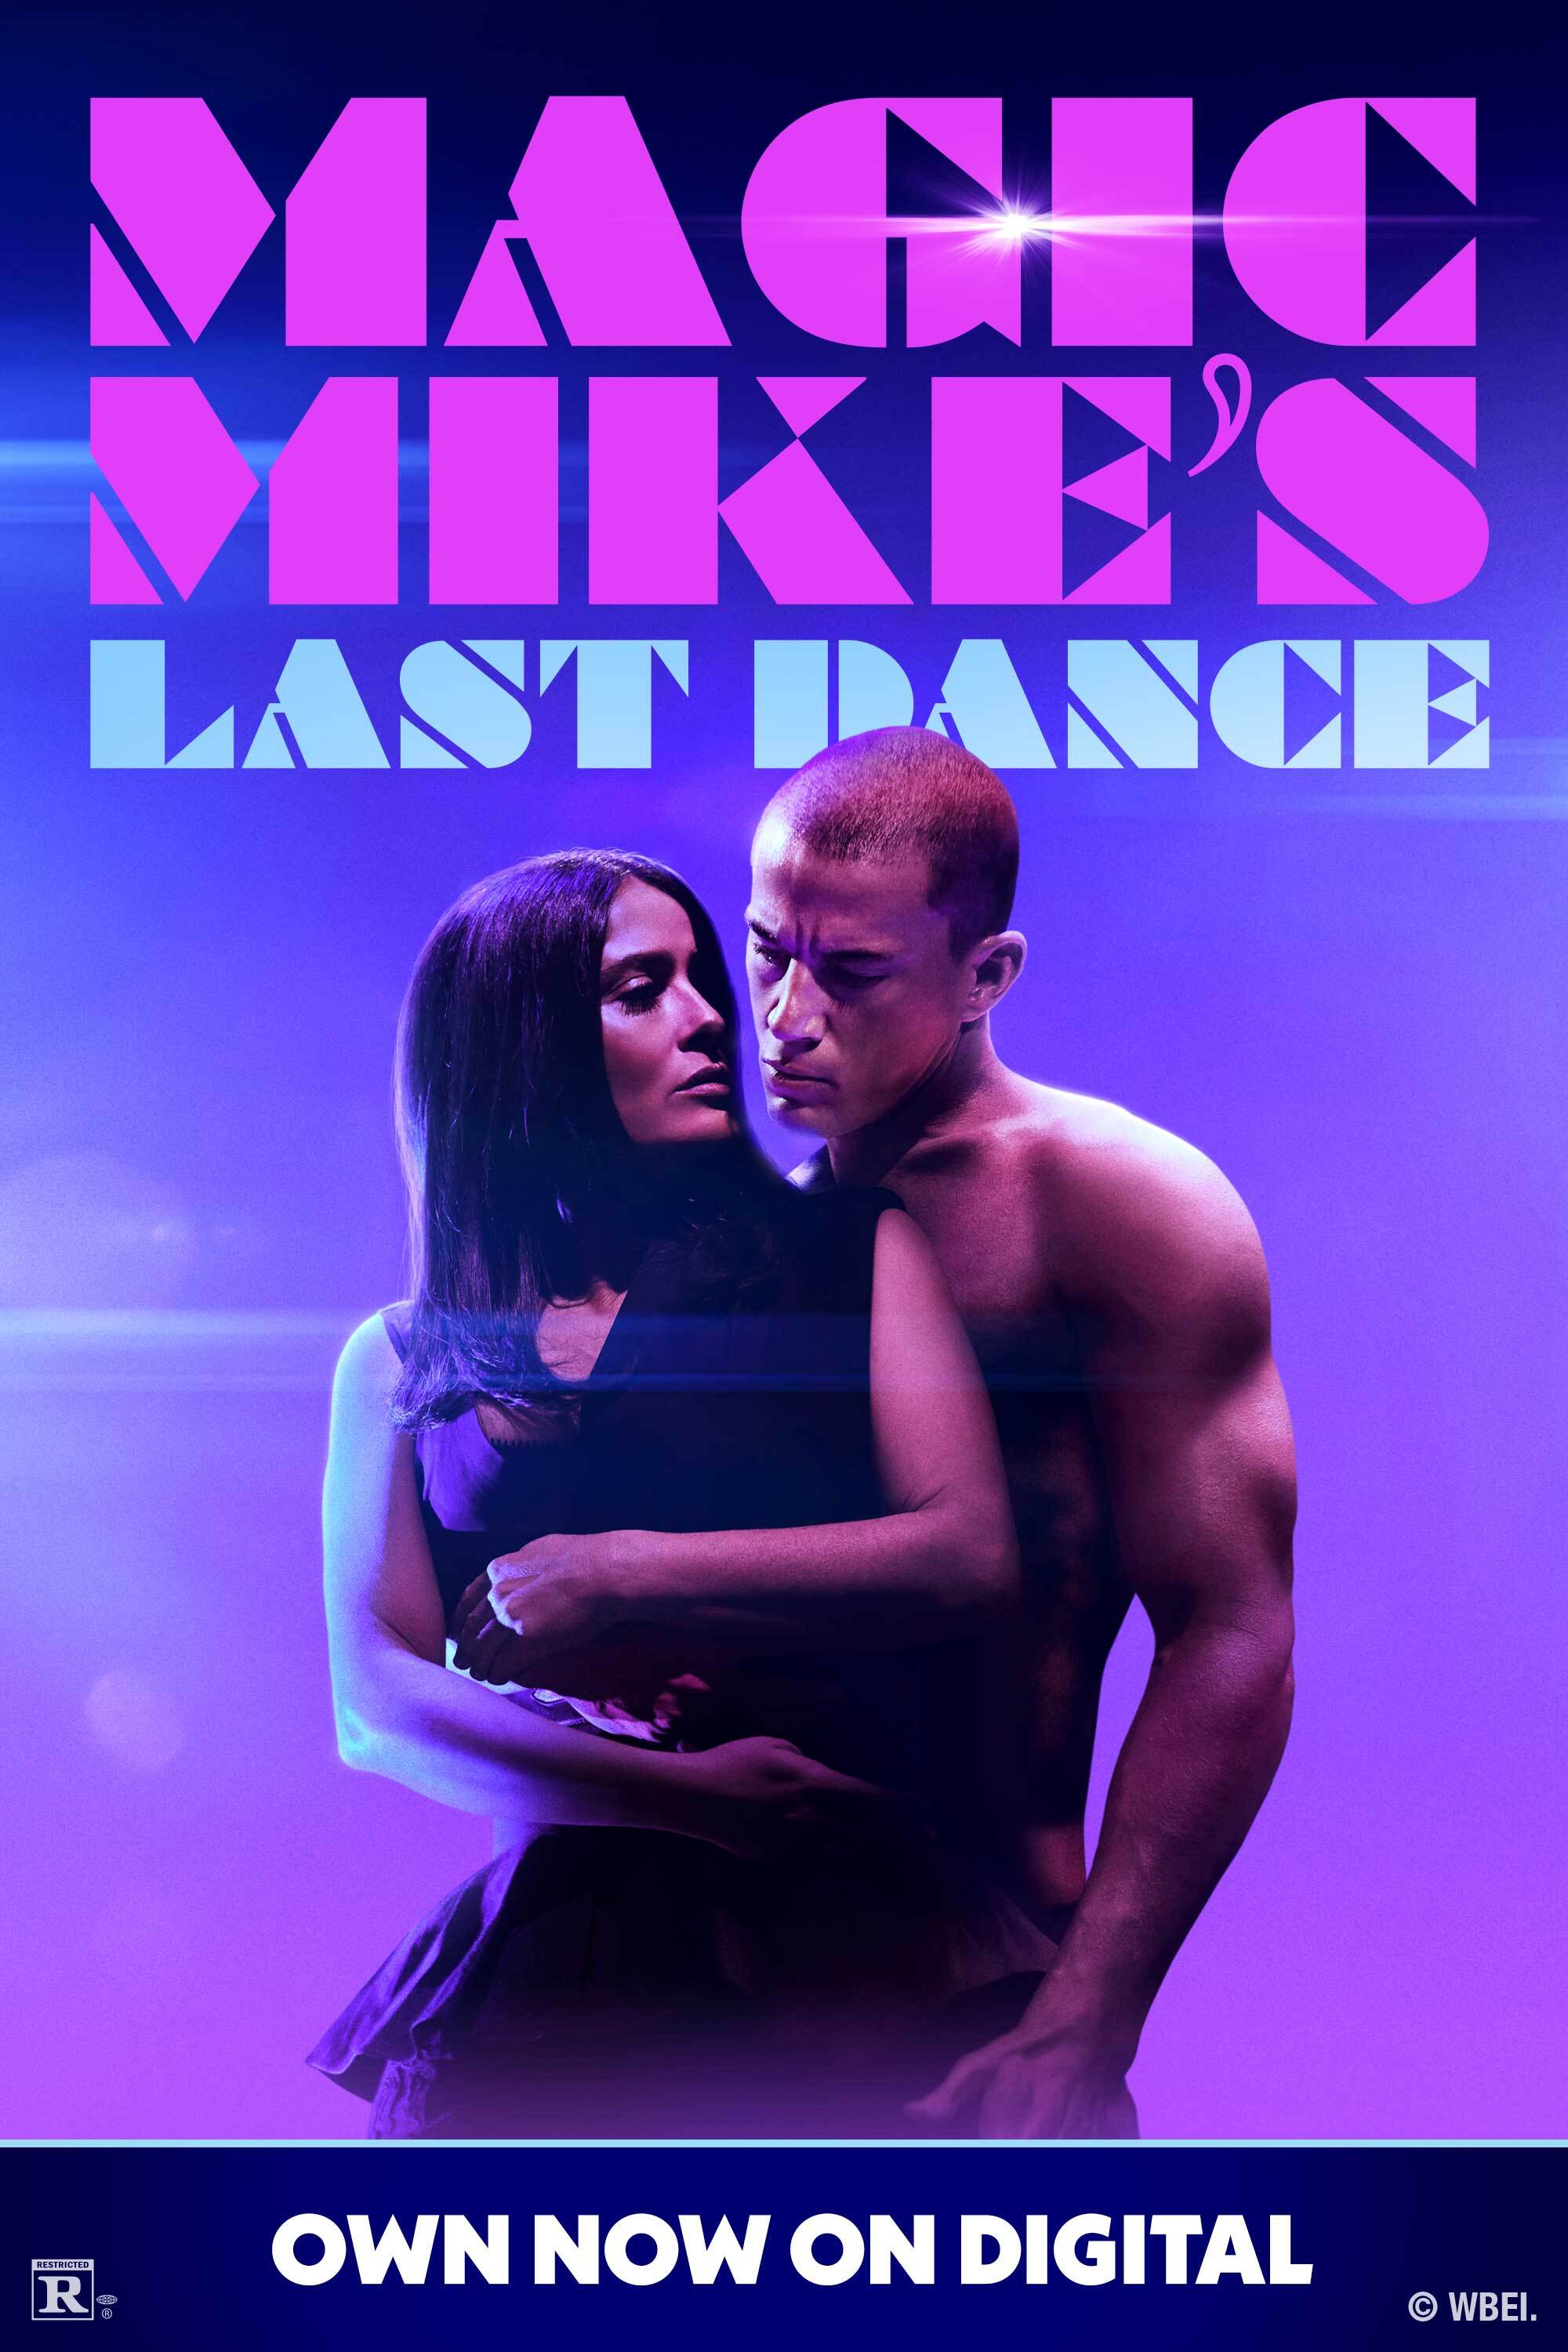 Enter for a Chance to Win a MAGIC MIKE'S LAST DANCE Digital Movie!